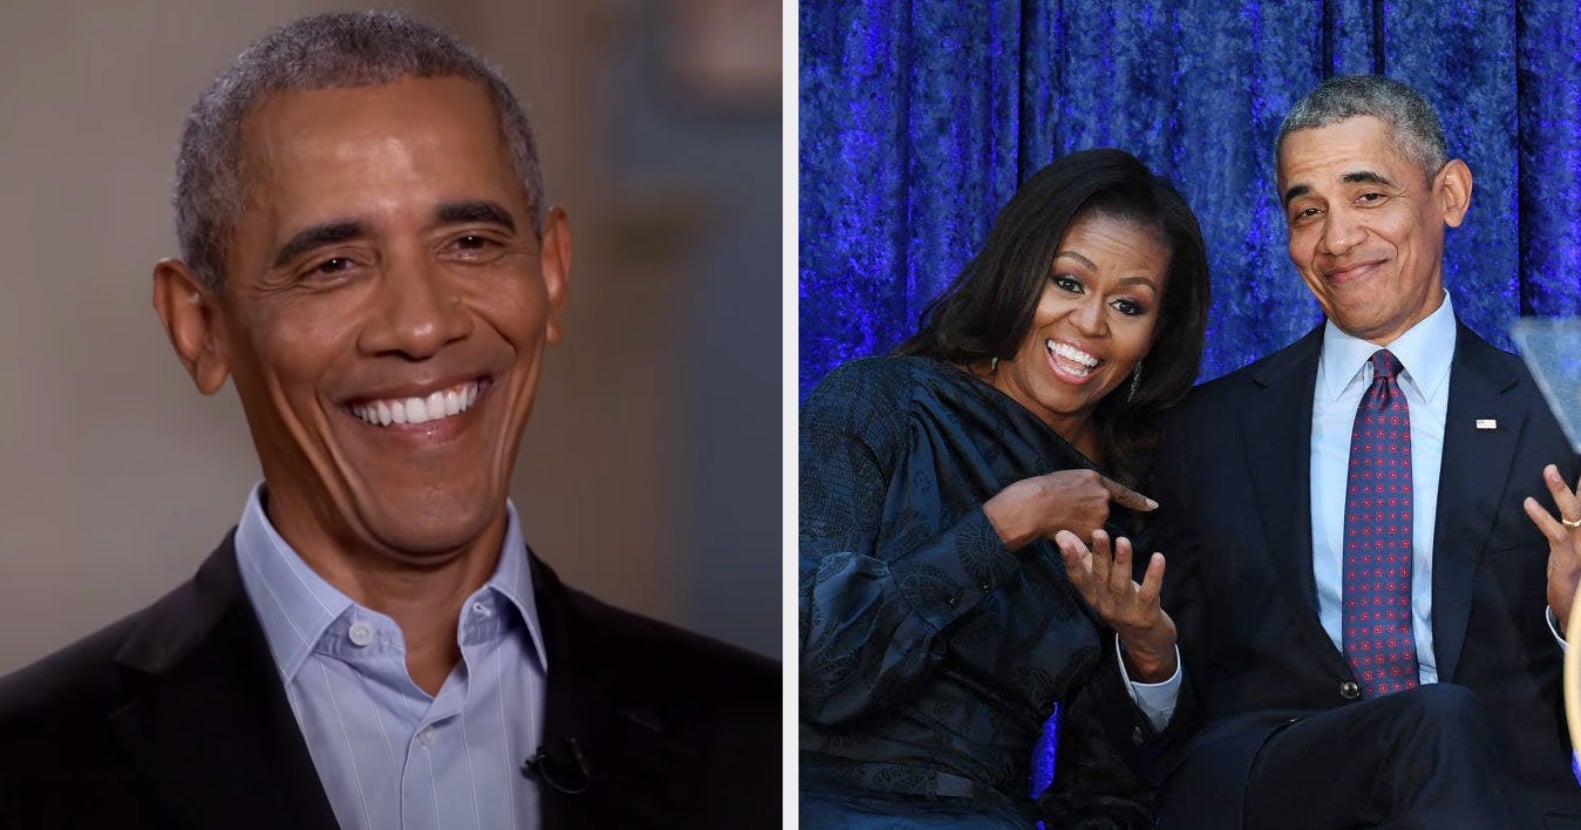 Former President Obama Joked About What Michelle Would Do If He Joined Joe Biden's Cabinet, And I'm Chuckling